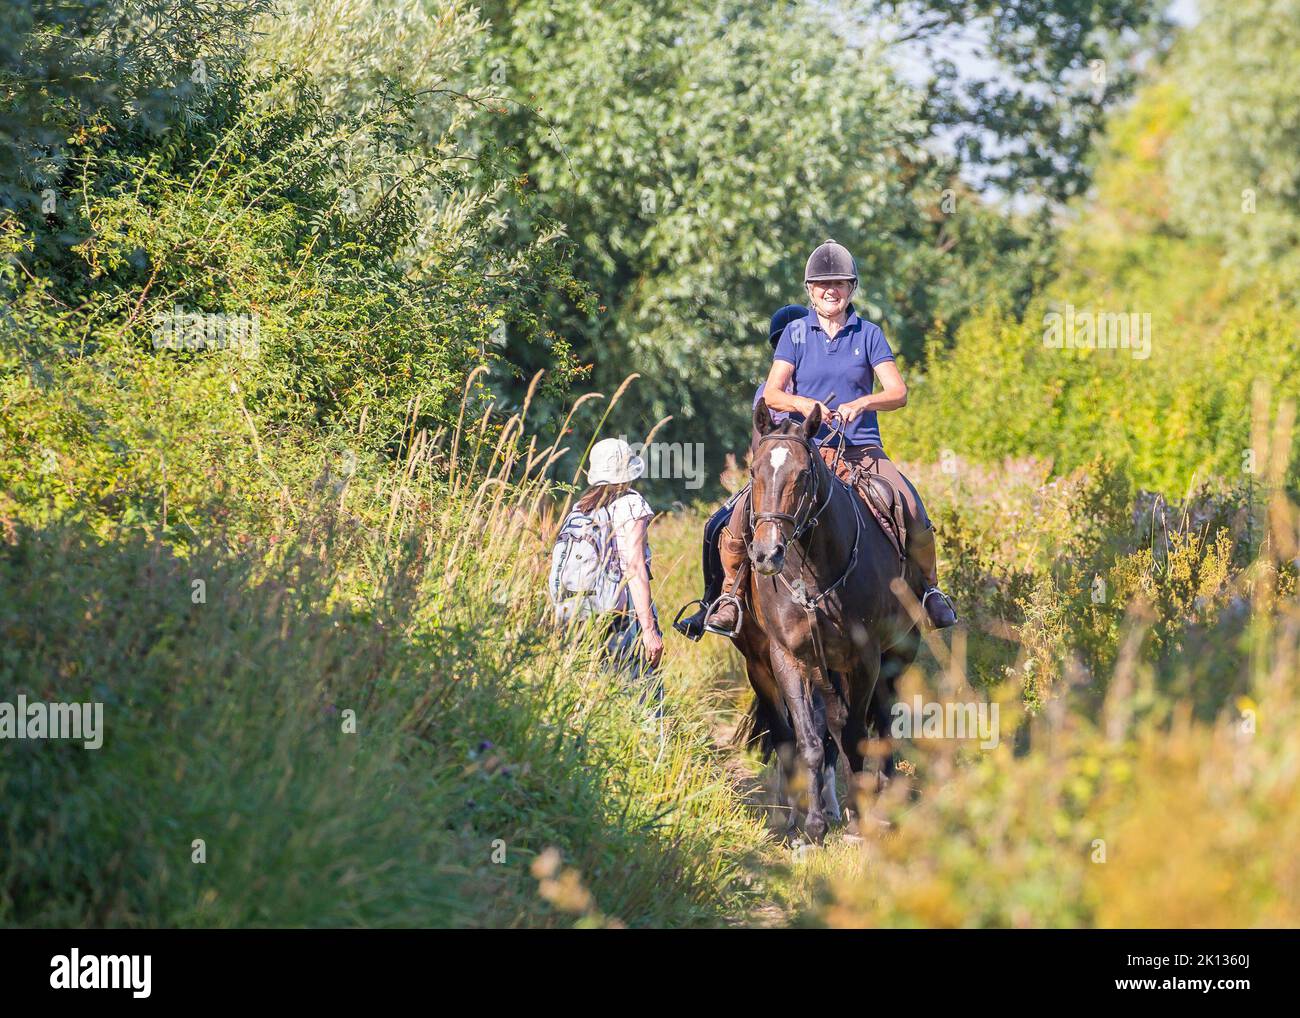 Front view of a smiling lady rider on a horse on a country path, bridleway passing a lady walker on a hot summer day in rural England, UK. Stock Photo